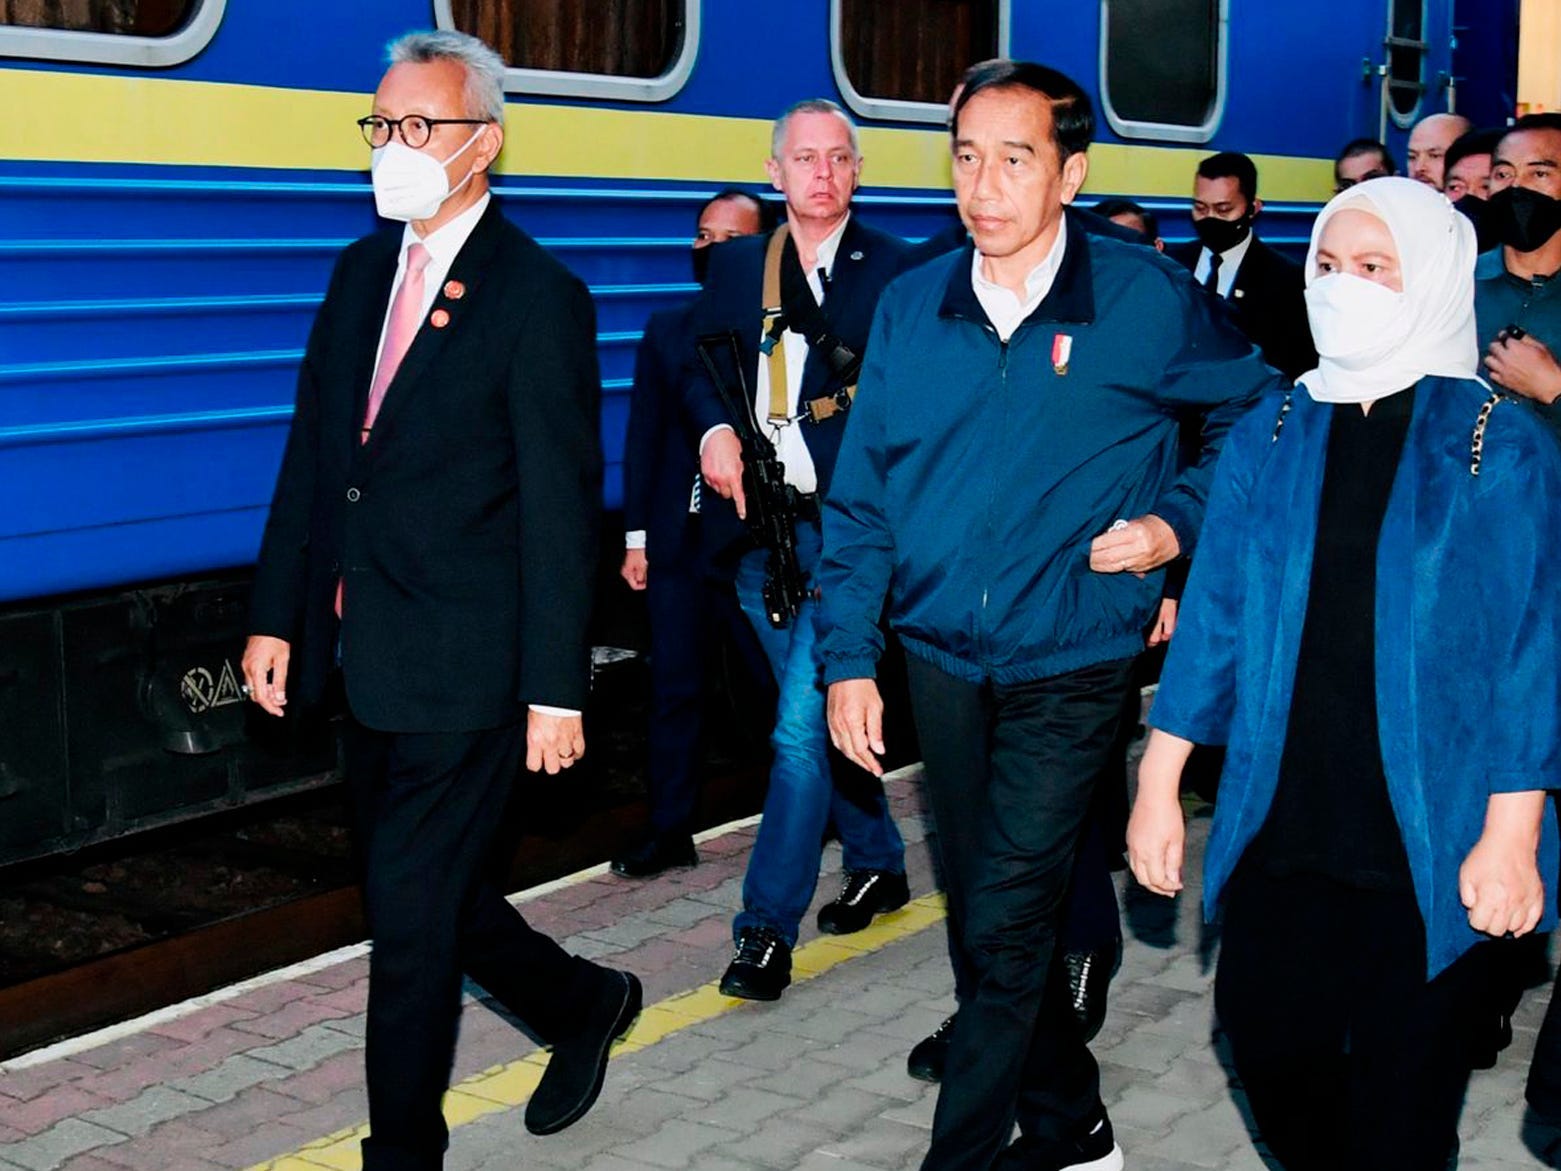 Indonesian President Joko Widodo, second right, and his wife Iriana, right, walk on the platform prior to boarding a train that will take them to Kyiv, Ukraine, at a railway station in Przemysl, Poland in June.